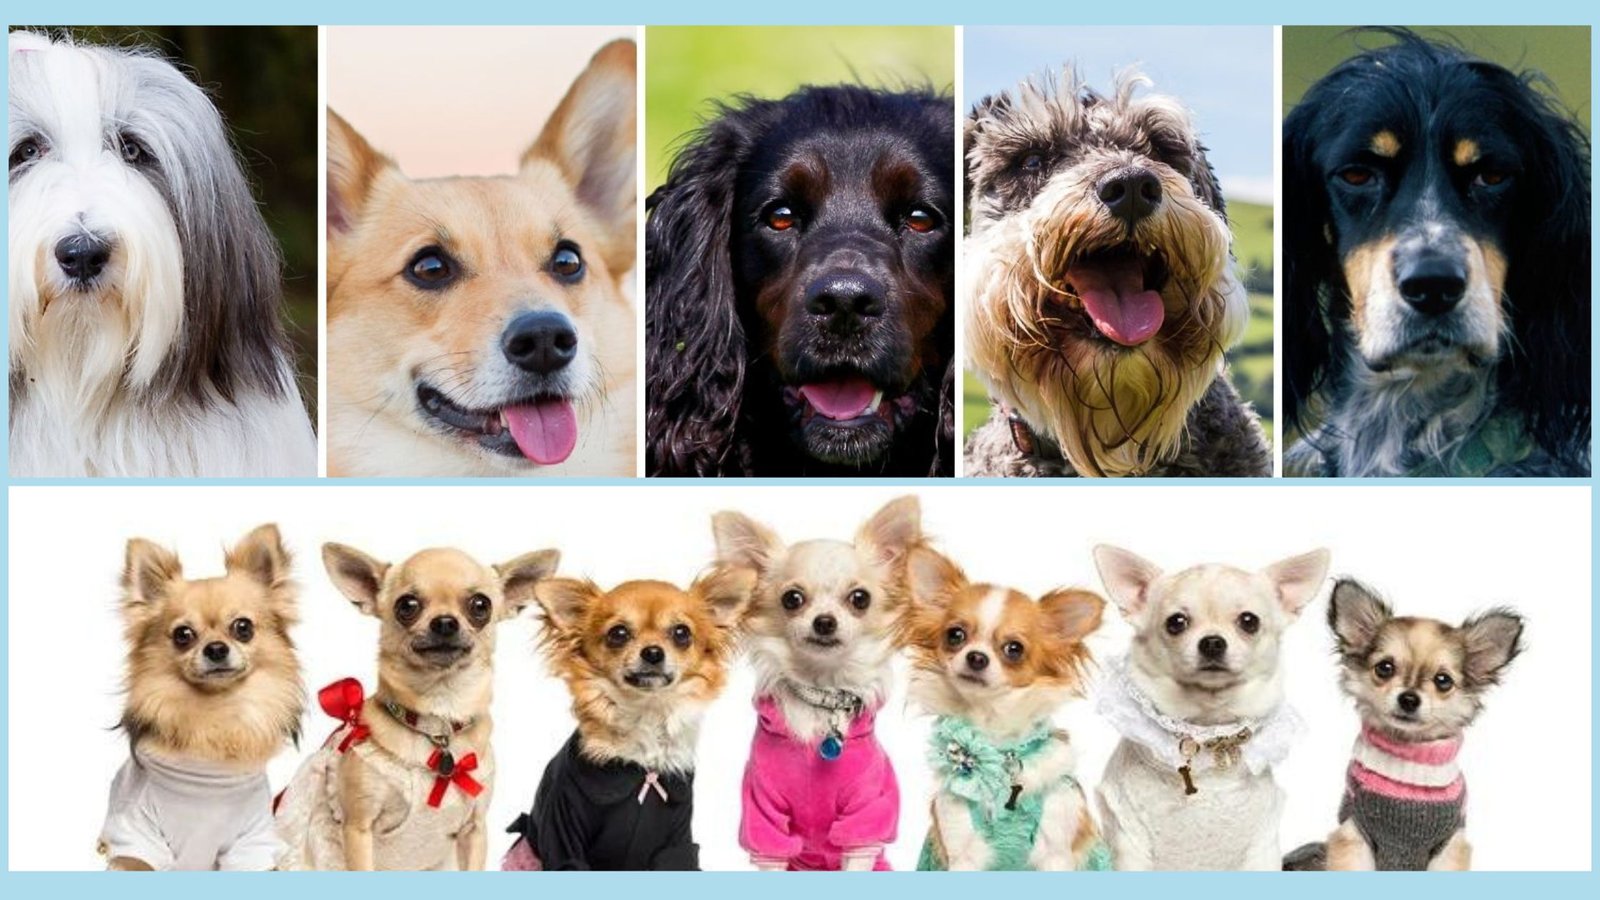 The Pint-Size­d Yorkie, Cavalier King Charles Spanie­l and Papillon